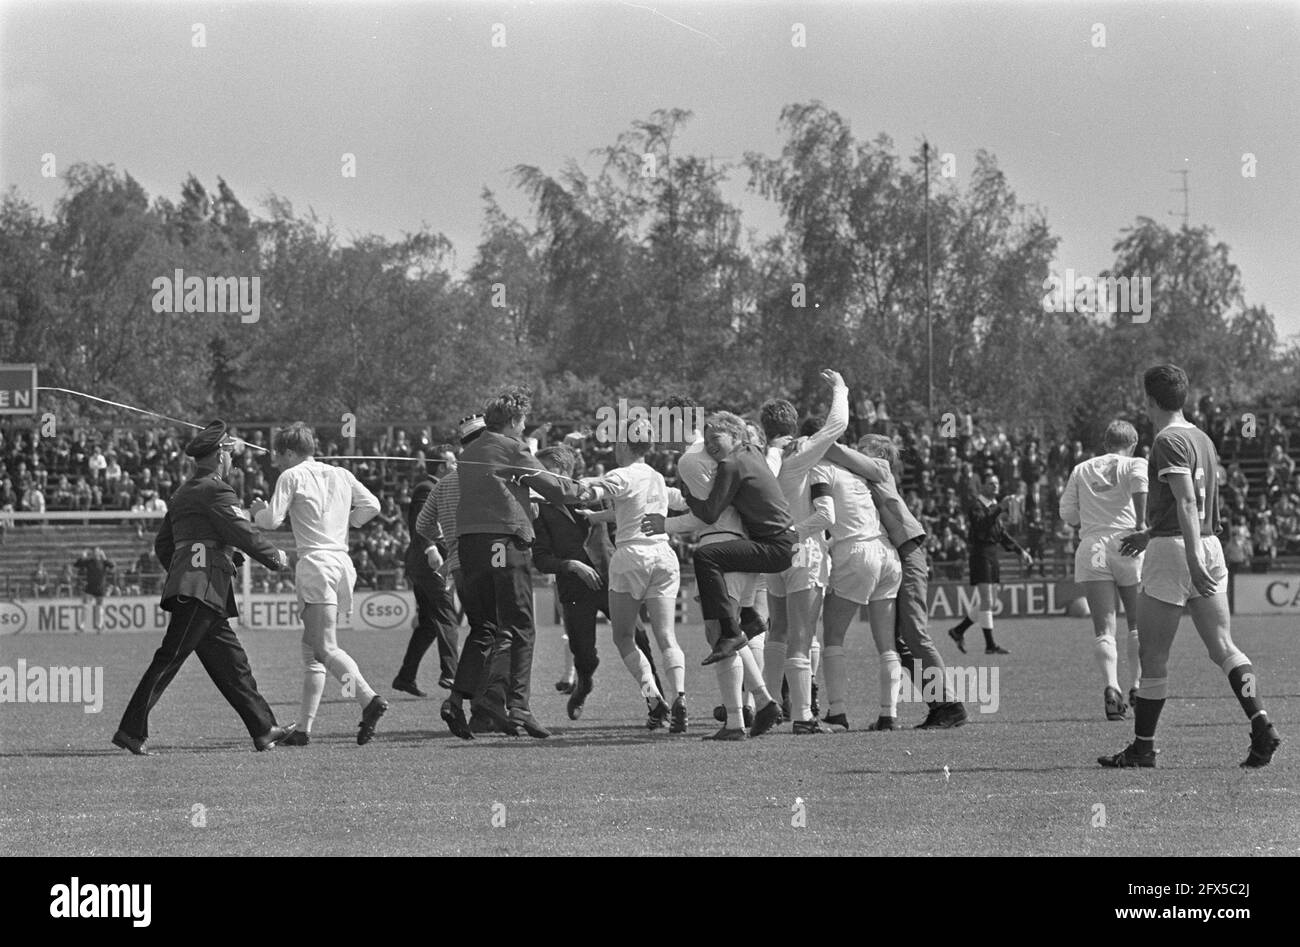 Fortuna against Telstar 1-3, soccer fans on field at first Telstar goal, May 21, 1967, sports, soccer, The Netherlands, 20th century press agency photo, news to remember, documentary, historic photography 1945-1990, visual stories, human history of the Twentieth Century, capturing moments in time Stock Photo